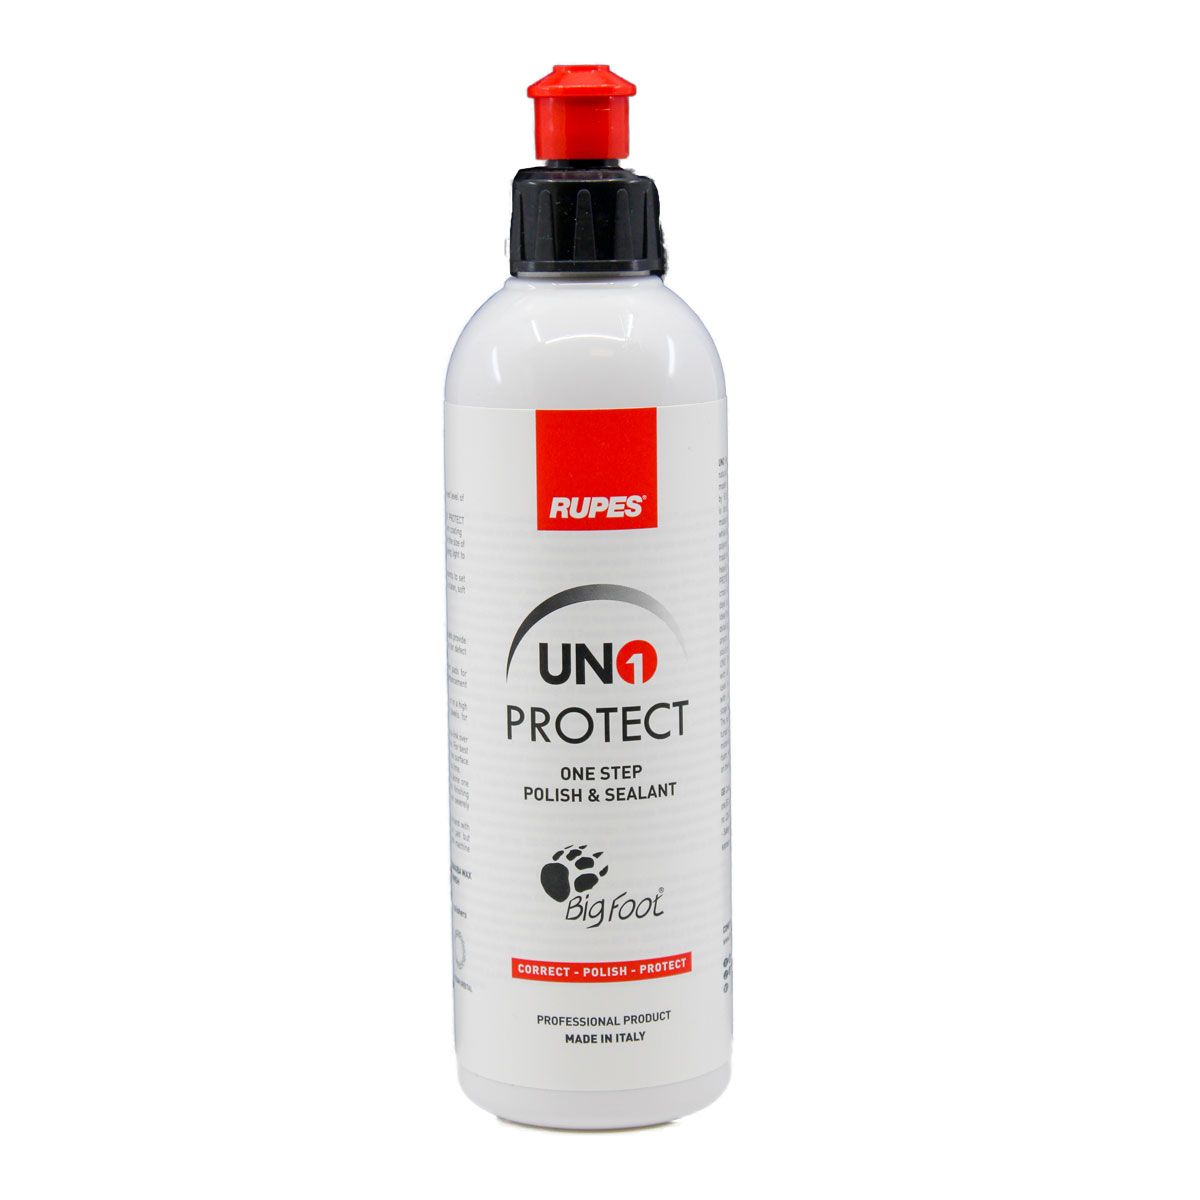 RUPES UNO PROTECT - ALL-IN-ONE POLISH & SEALANT – Drive Auto Appearance